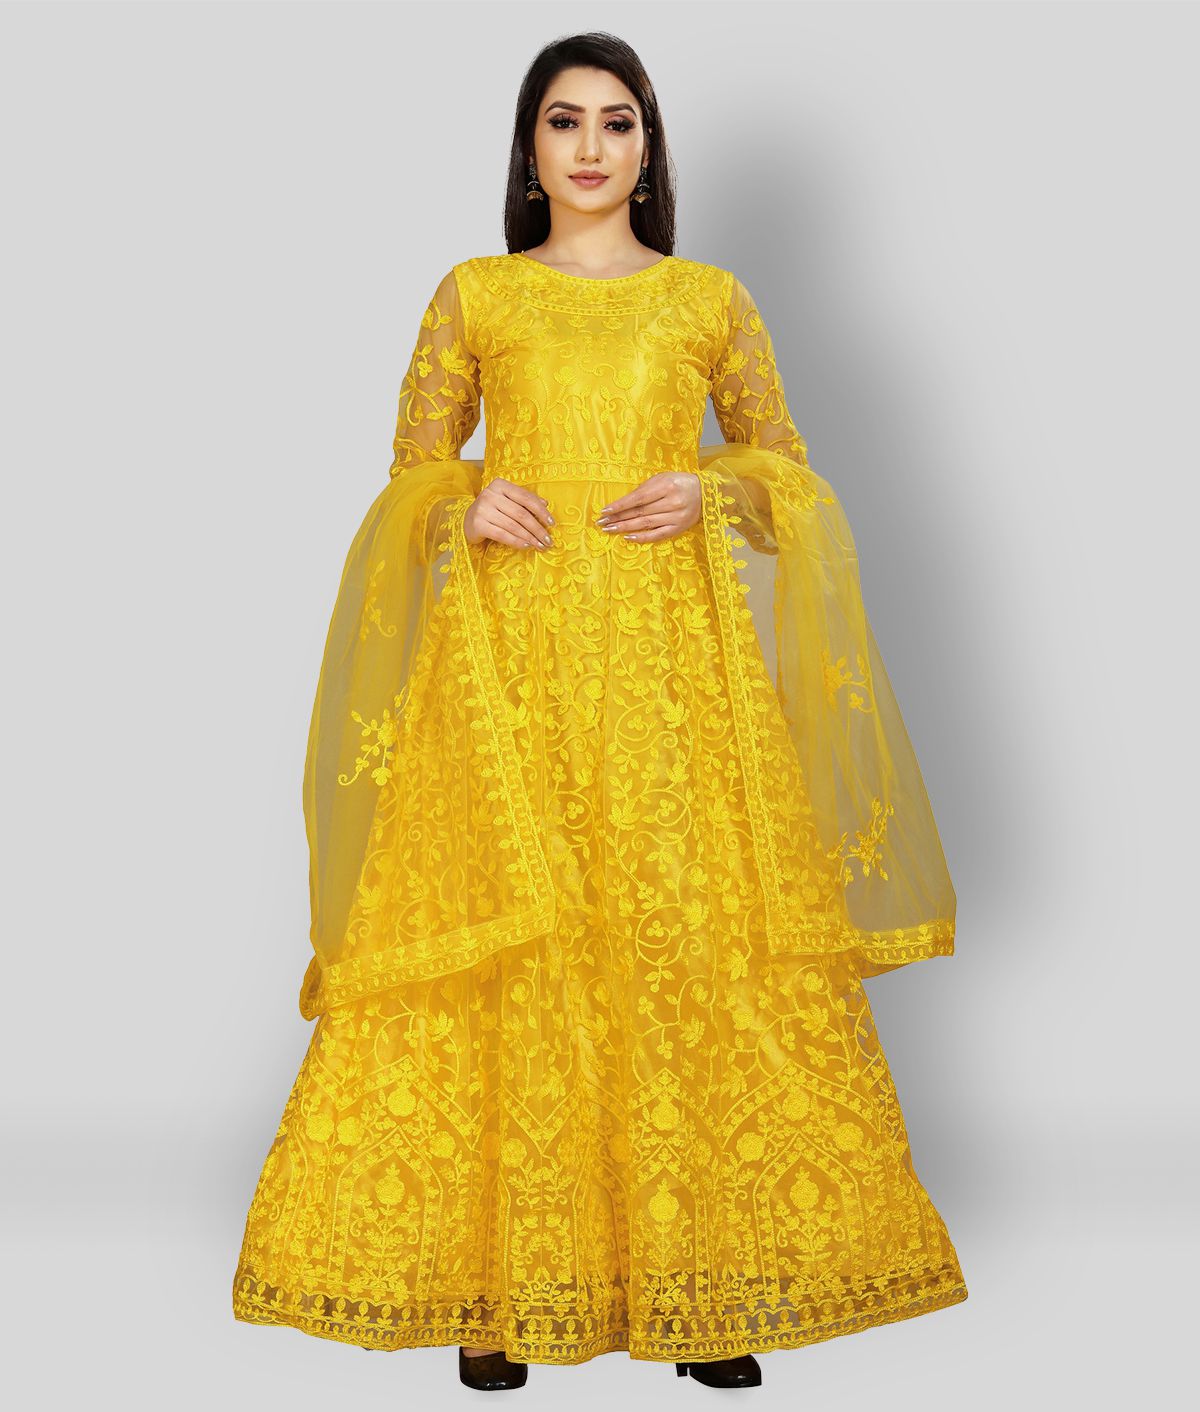     			Aika - Yellow Anarkali Net Women's Semi Stitched Ethnic Gown ( Pack of 1 )